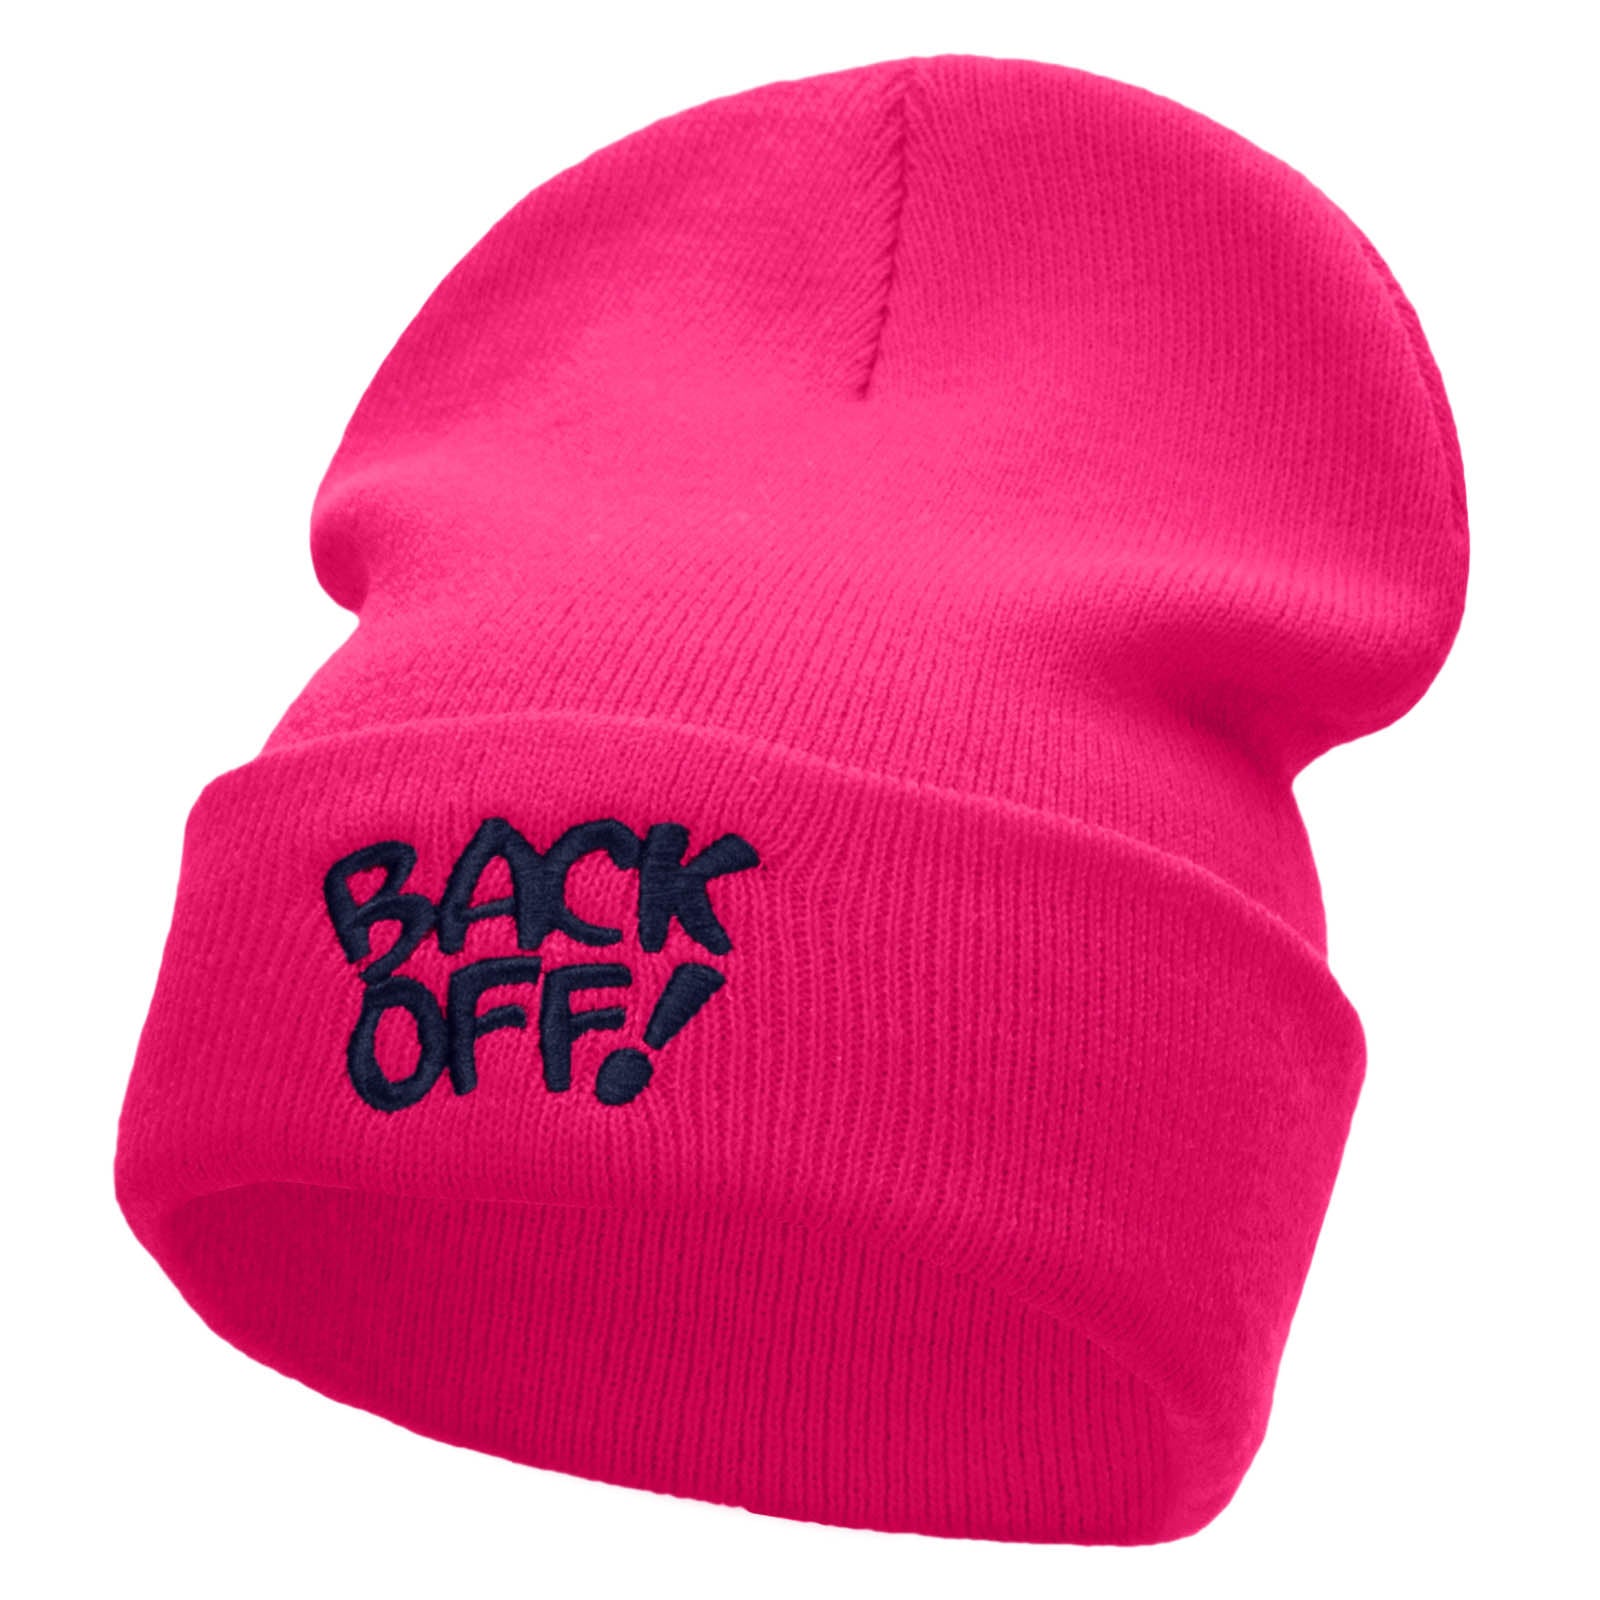 Back Off Phrase Embroidered 12 Inch Long Knitted Beanie - Magenta OSFM